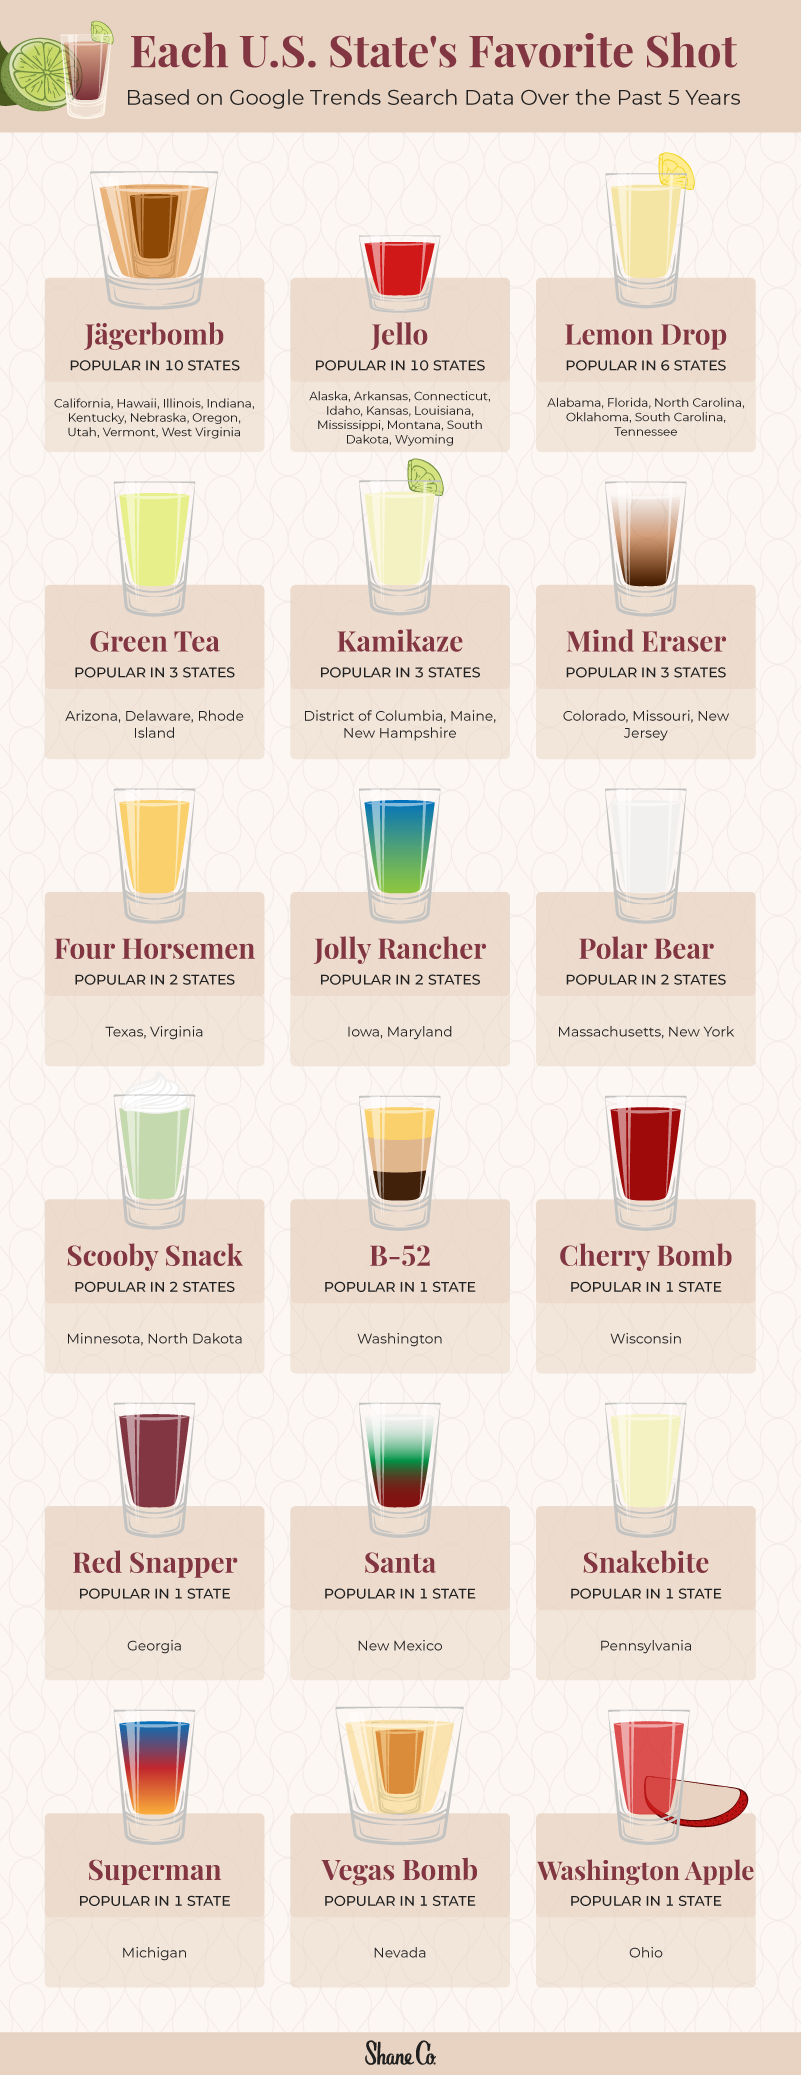  Illustrations of each state’s most popular shot with their shot name listed below